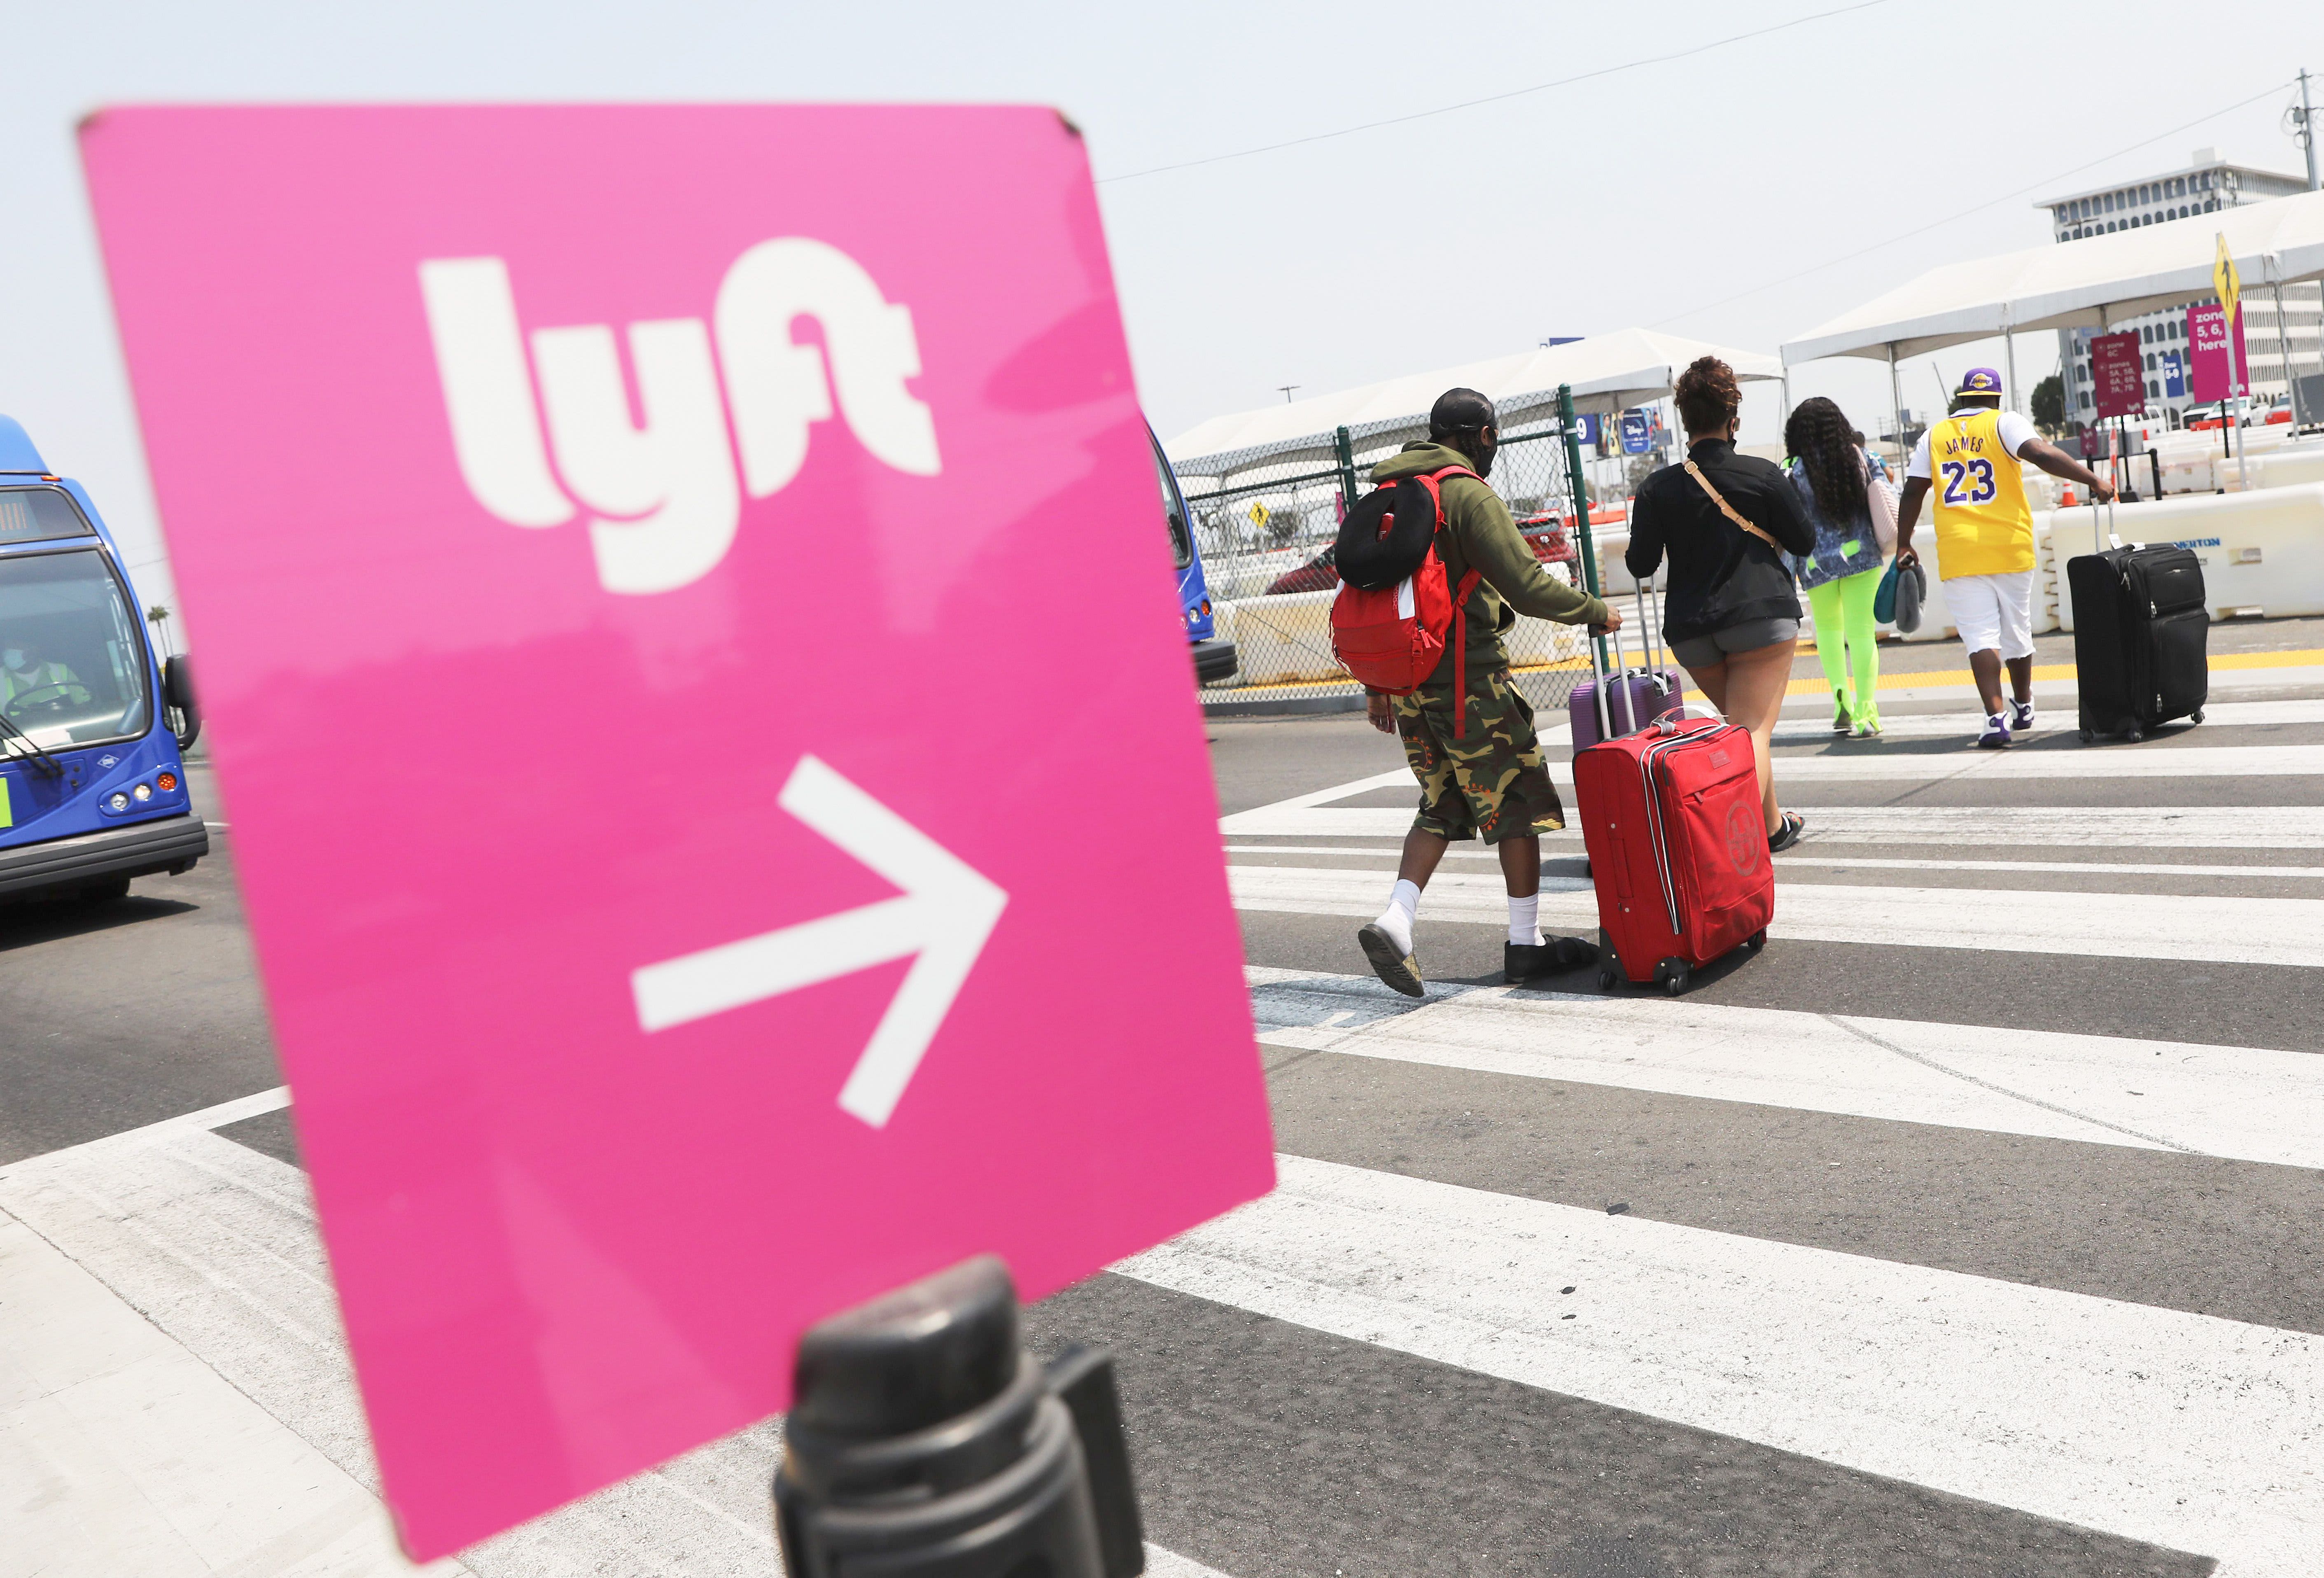 Analysts bail on Lyft after latest earnings, say Uber is cementing its place as leader